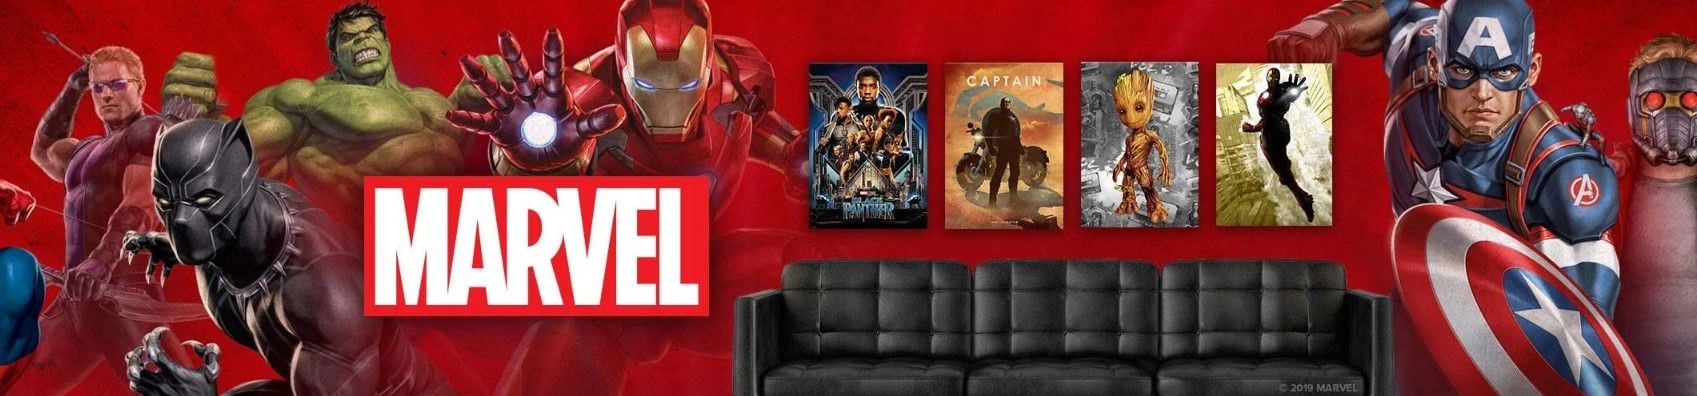 Marvel Officialy Licensed Prints on Wall